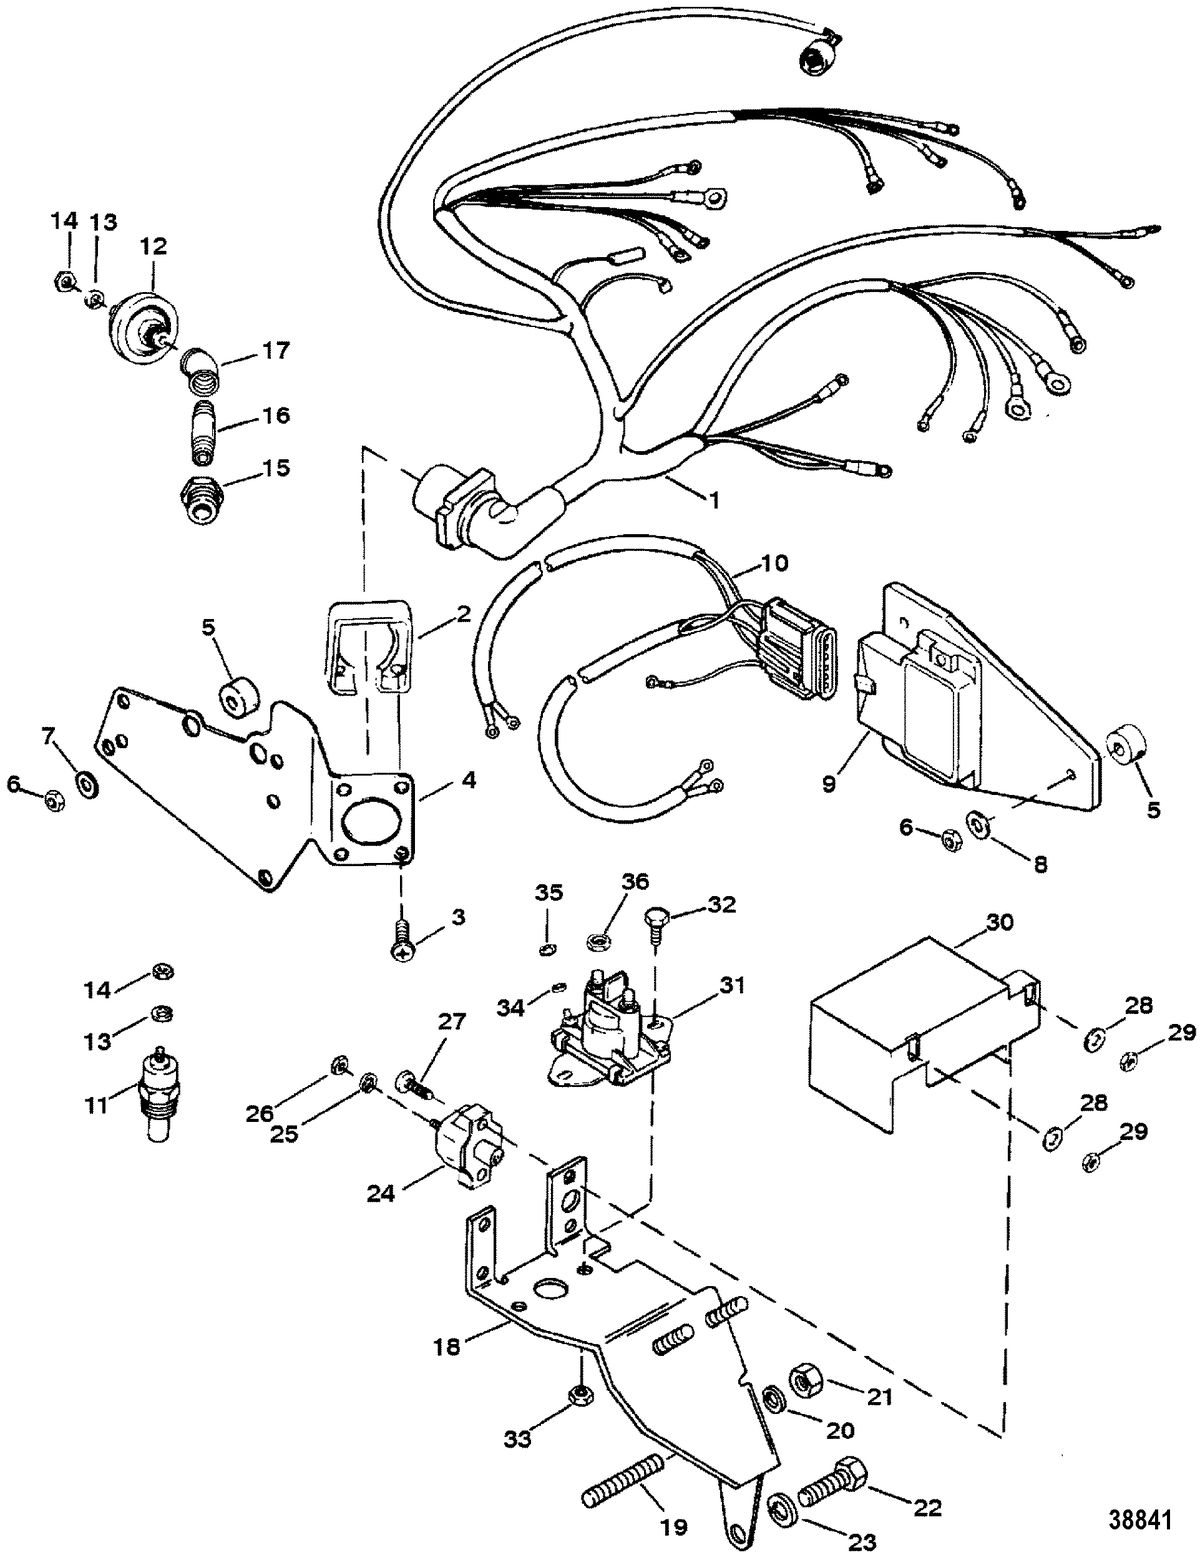 MERCRUISER 7.4L 454 MAG BRAVO GEN V WIRING HARNESS/ELECTRICAL(MOUNTED ON EXHAUST ELBOW)TB IV